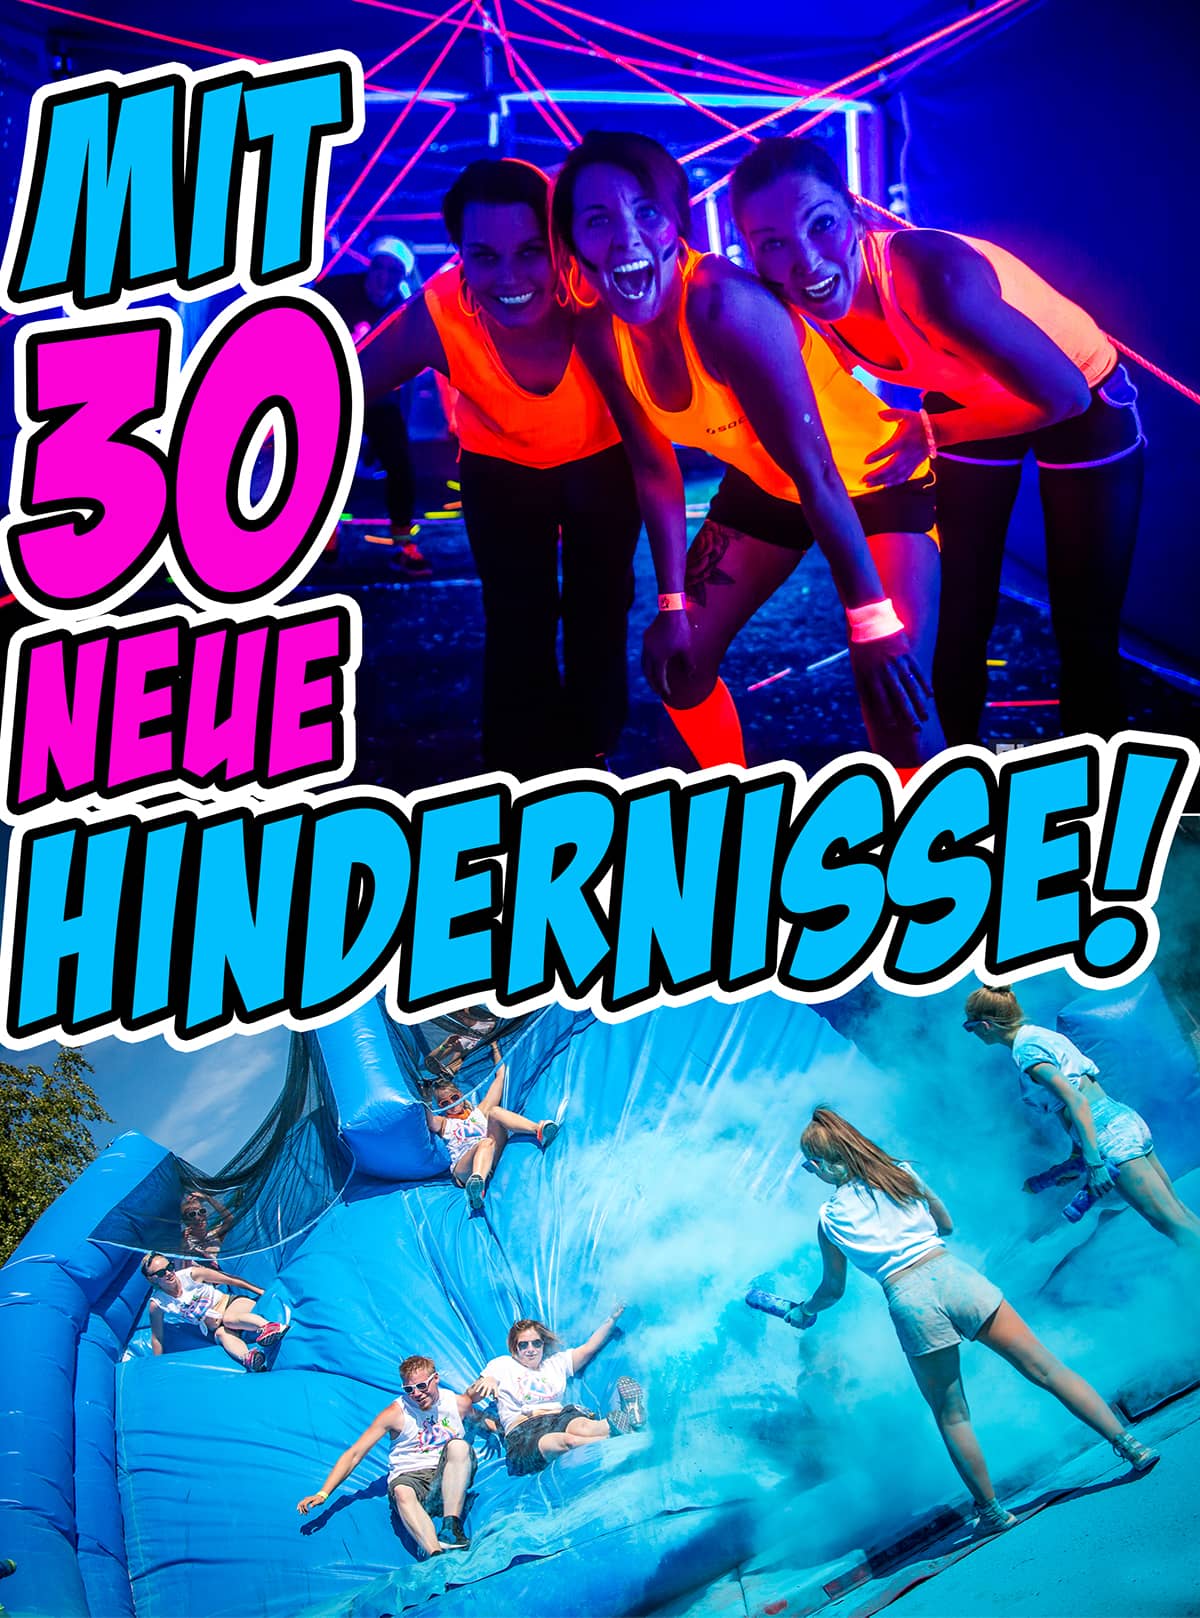 Color Obstacle Rush - mit 30 neue hindernisse